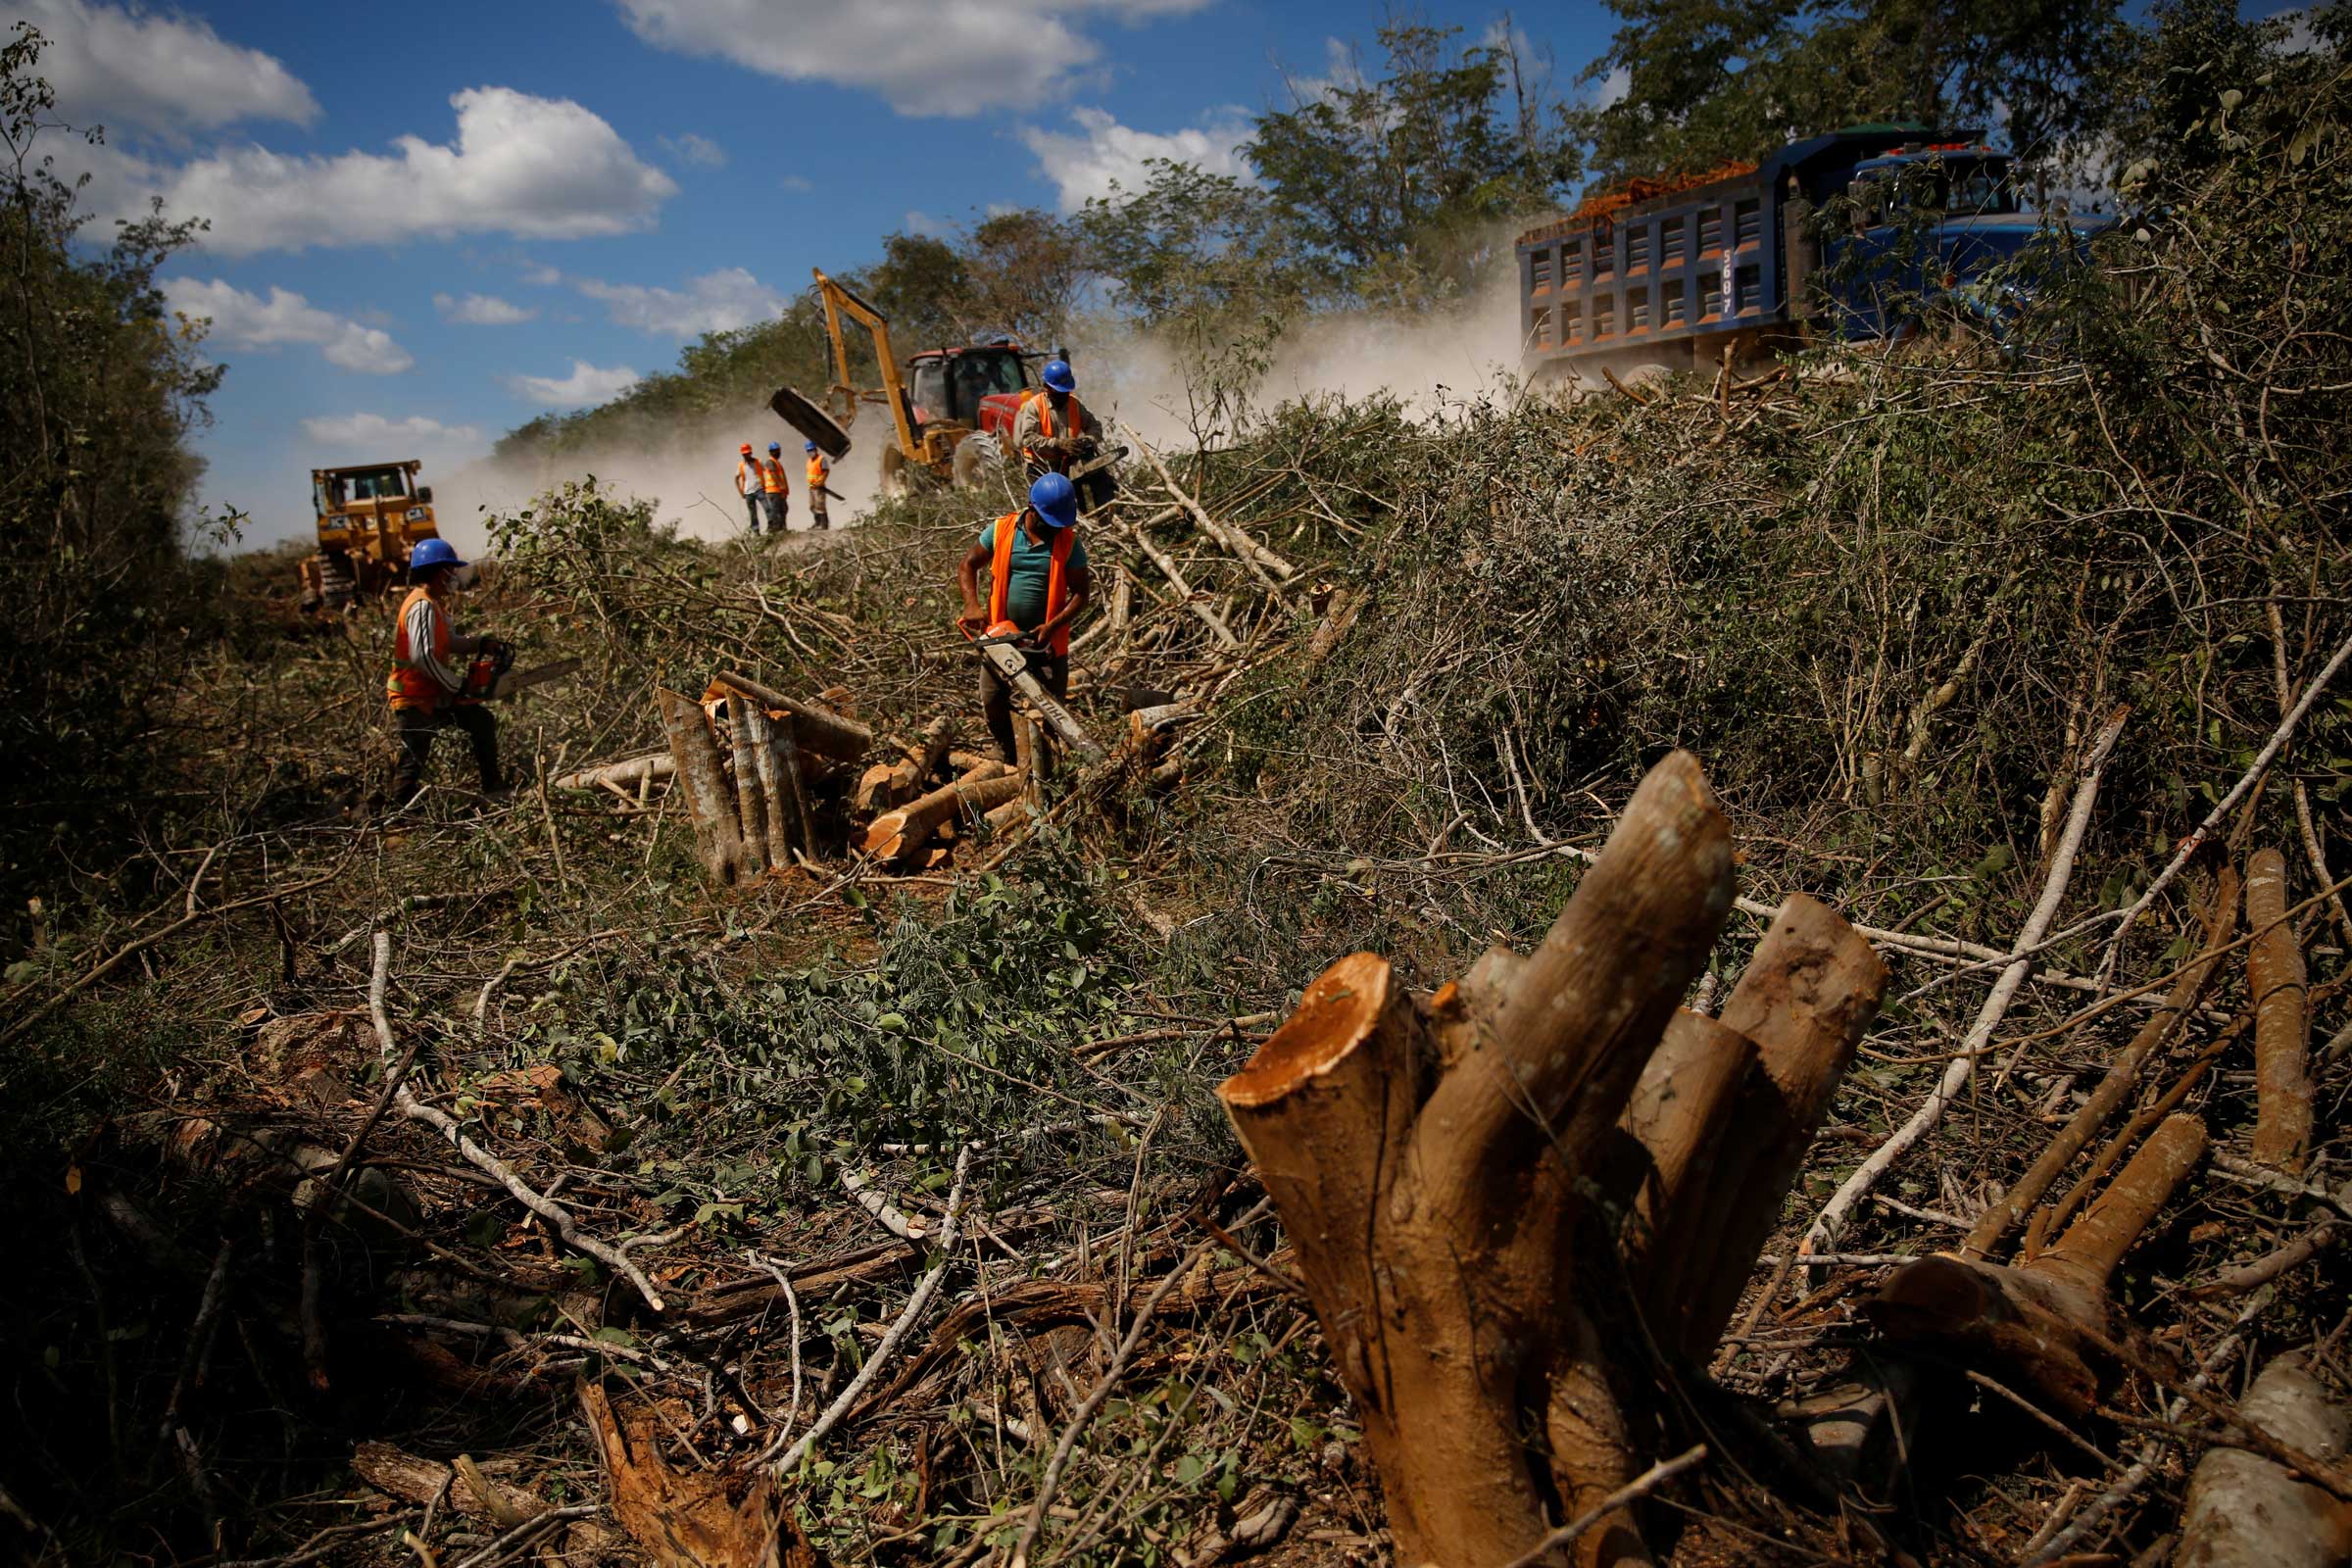 Workers clear trees for the construction of section 4 of the new Mayan Train route, near Nuevo Xcan, Mexico on March 3, 2022. (Jose Luis Gonzalez—Reuters)